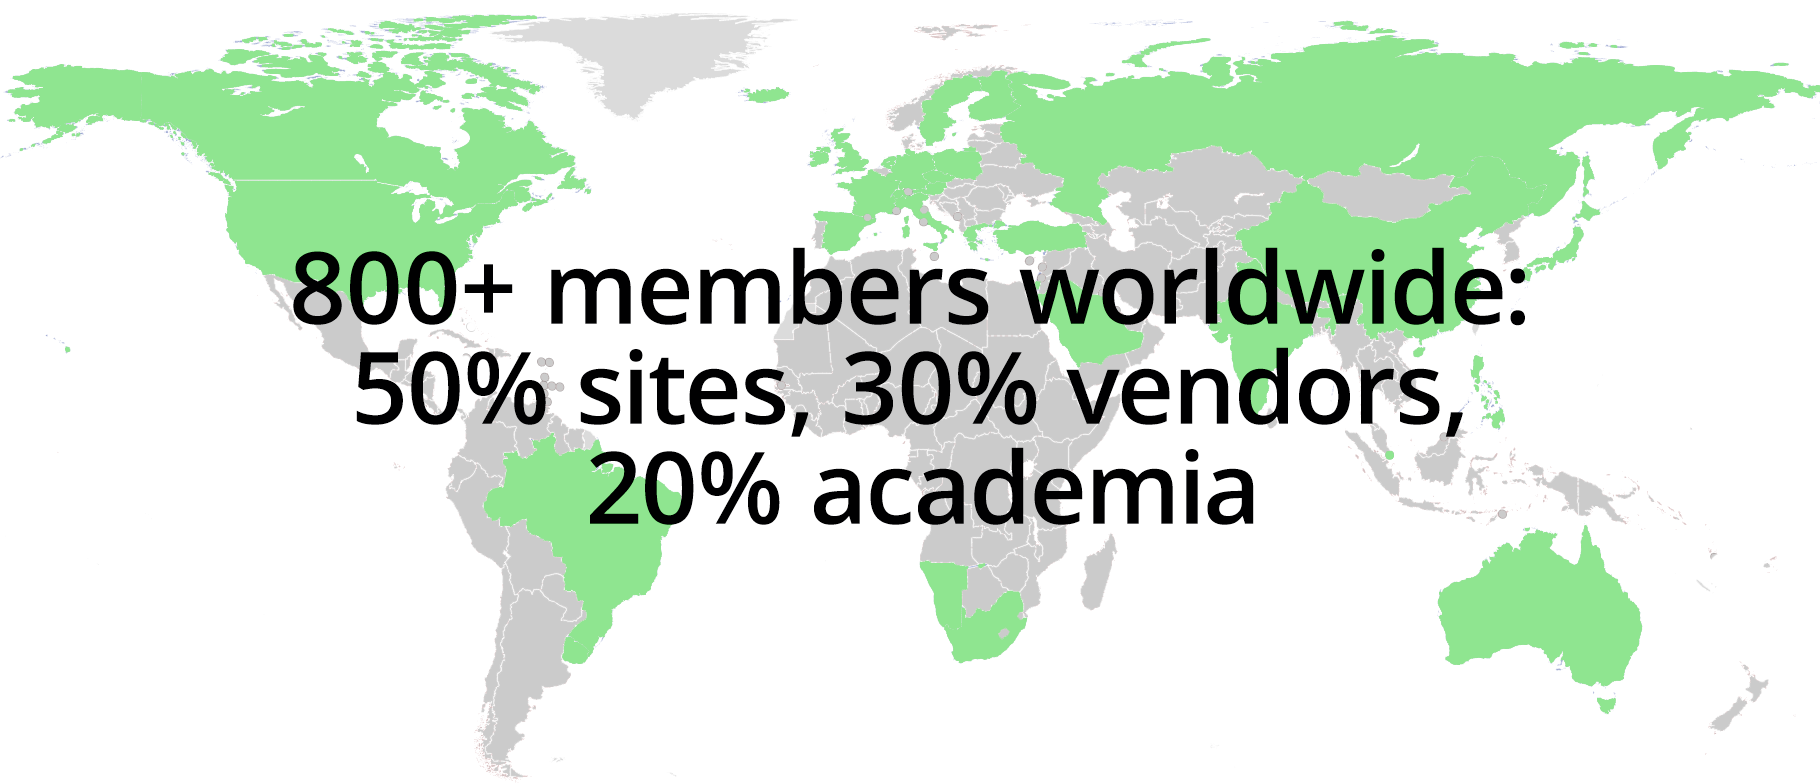 map of location of members with overlay text "800+ members worldwide: 50% sites, 30% vendors, 20% academia"